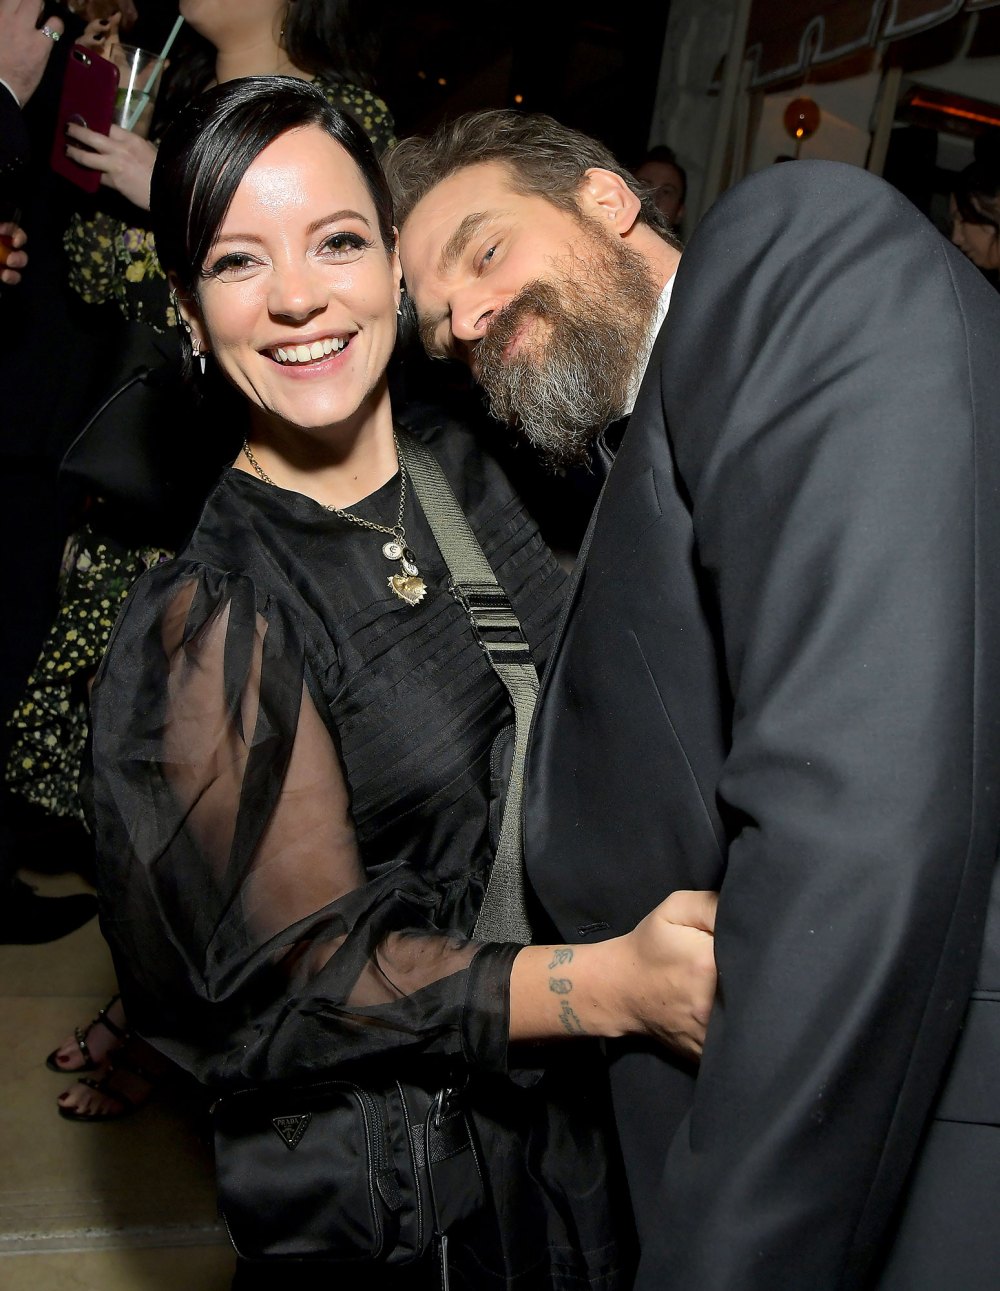 Lily Allen Says She Sometimes Turns Down David Harbour NSFW Requests 2